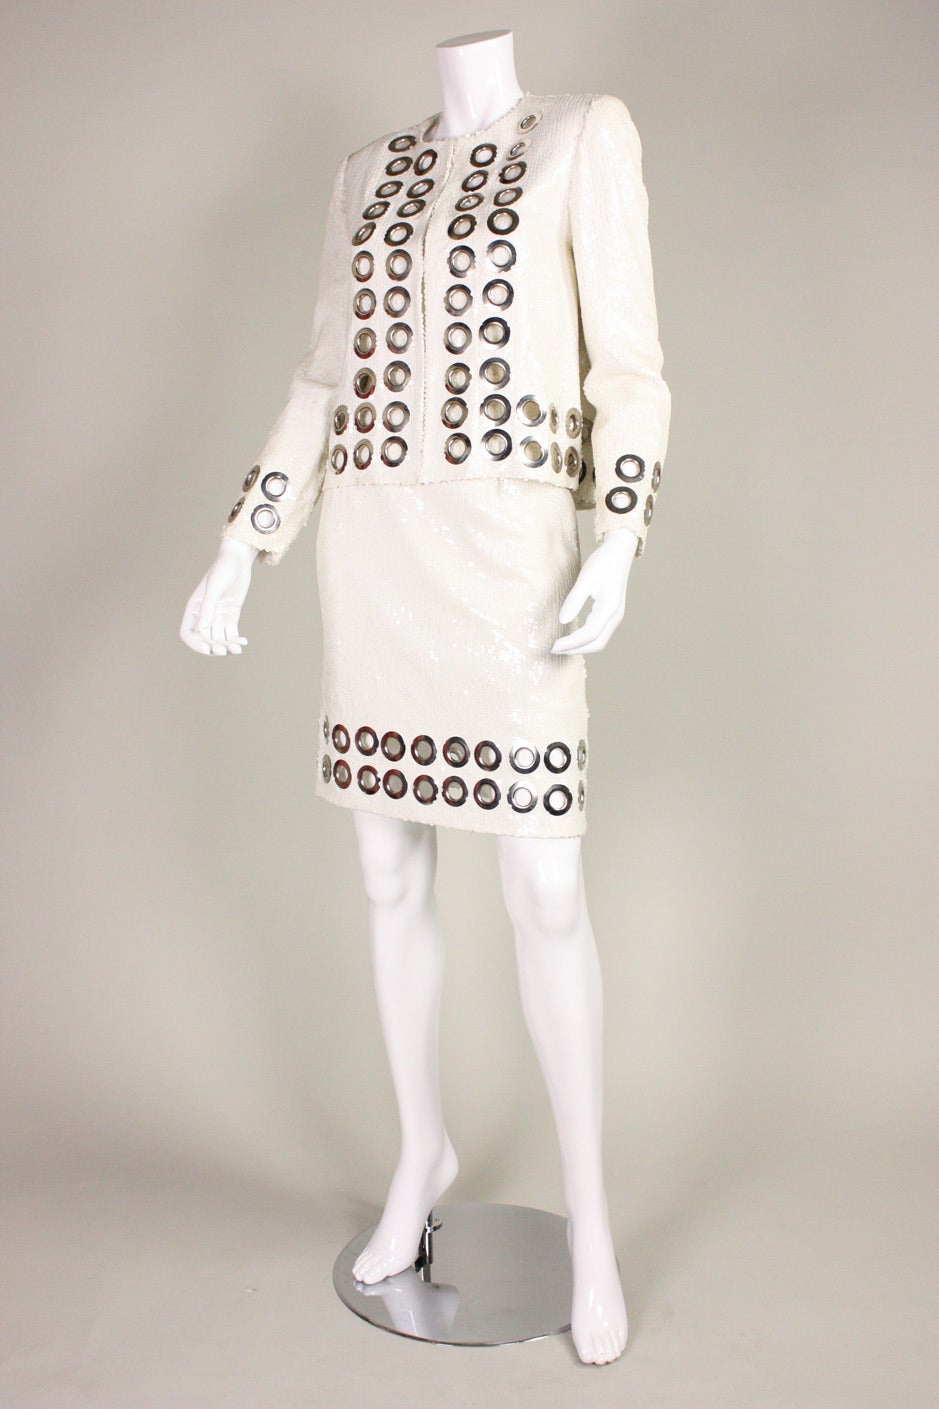 Vintage three piece ensemble from Jeanette Kastenberg for St. Martin dates to the 1980's.  It is covered with white sequins and has large silver-toned grommets, which trim the jacket and skirt.  Jacket has center front hook and eye closures.  Tank